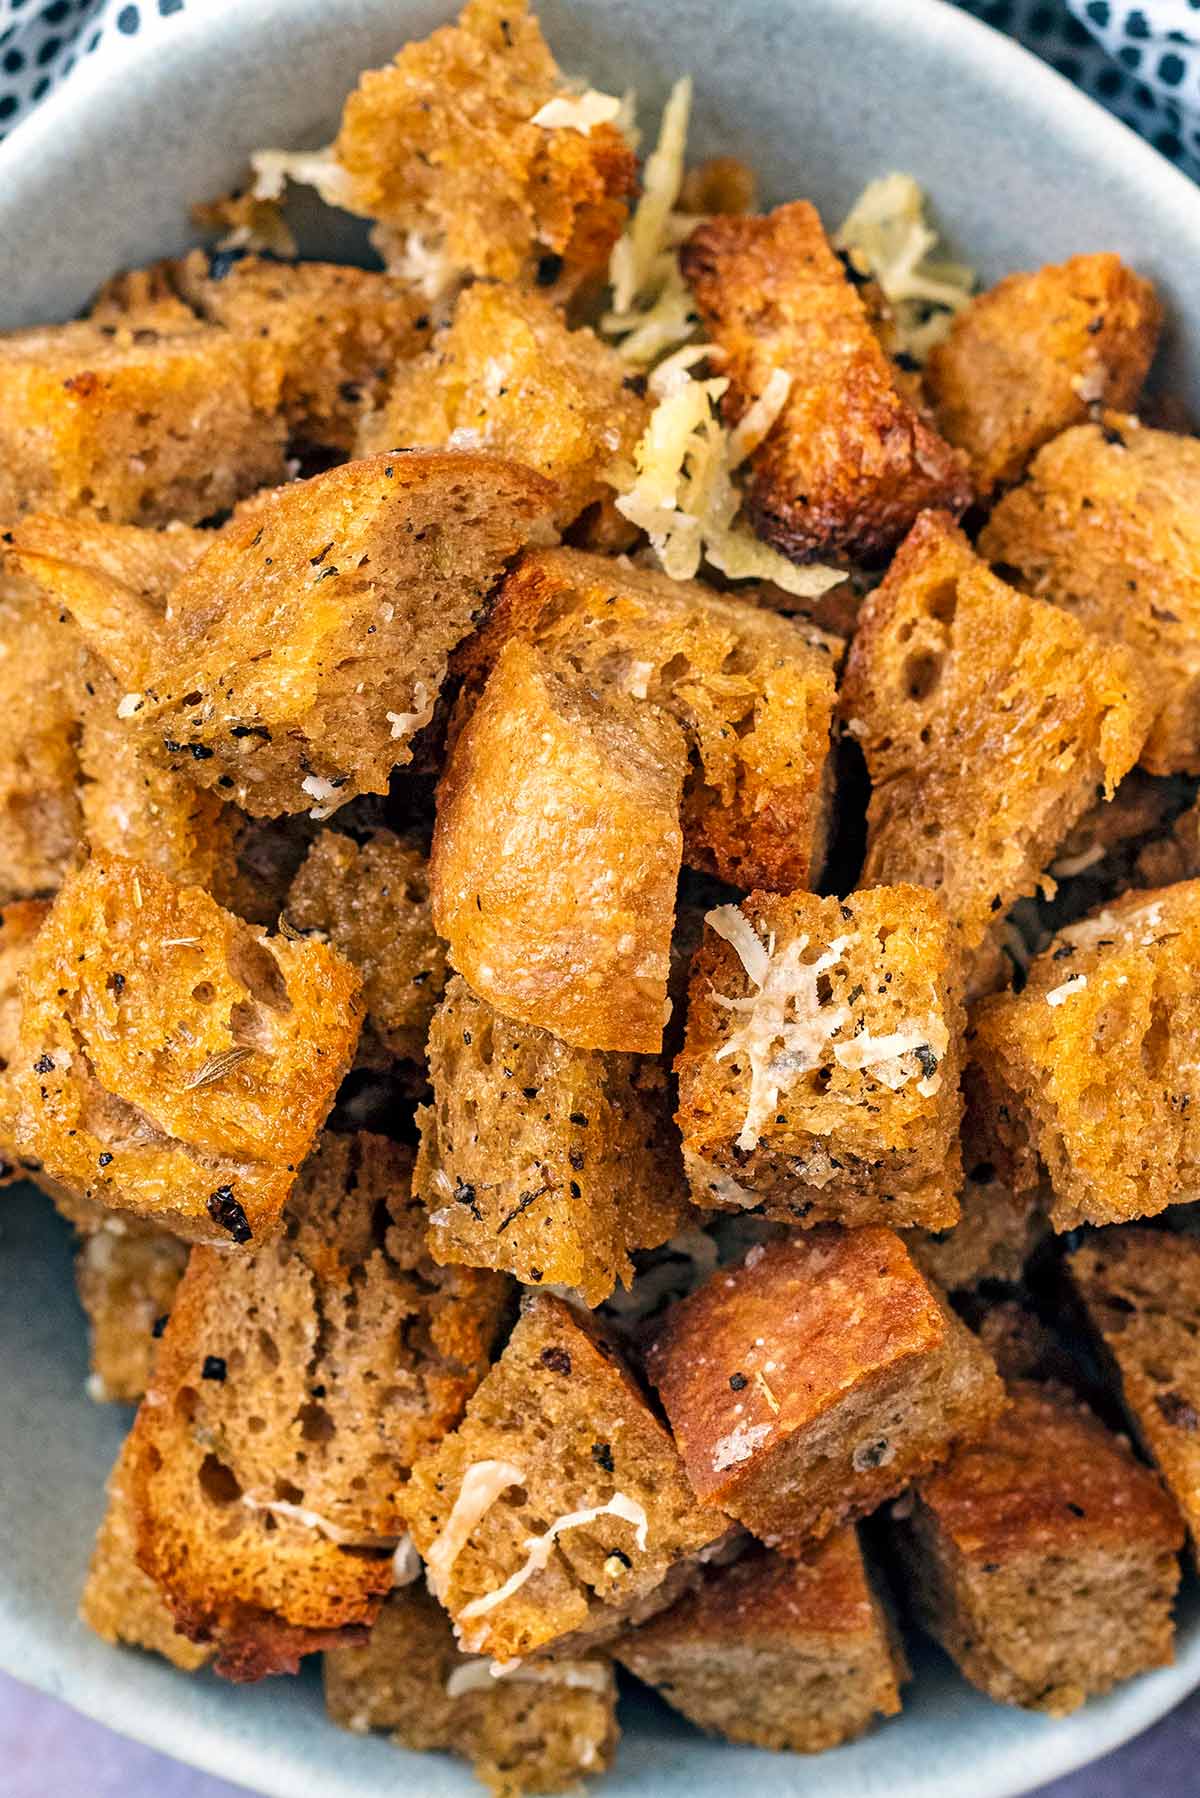 Croutons with grated Parmesan on them.